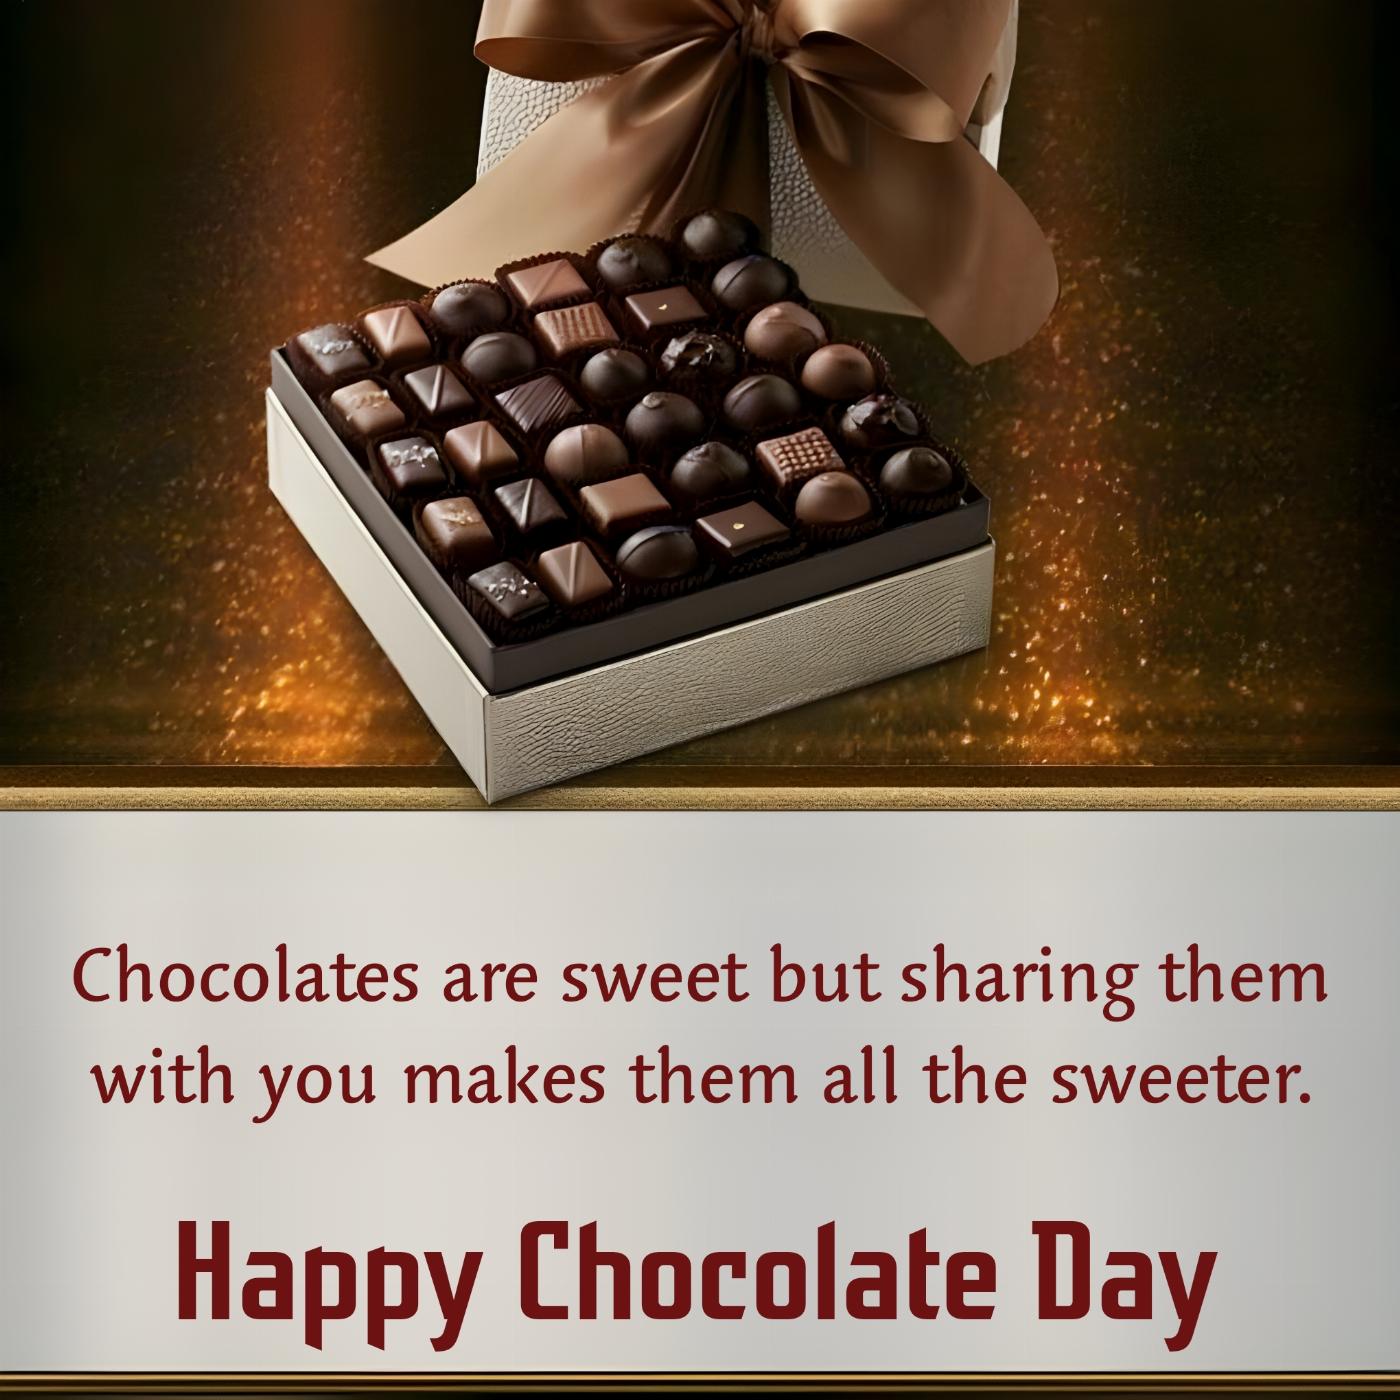 Chocolates are sweet but sharing them with you makes them